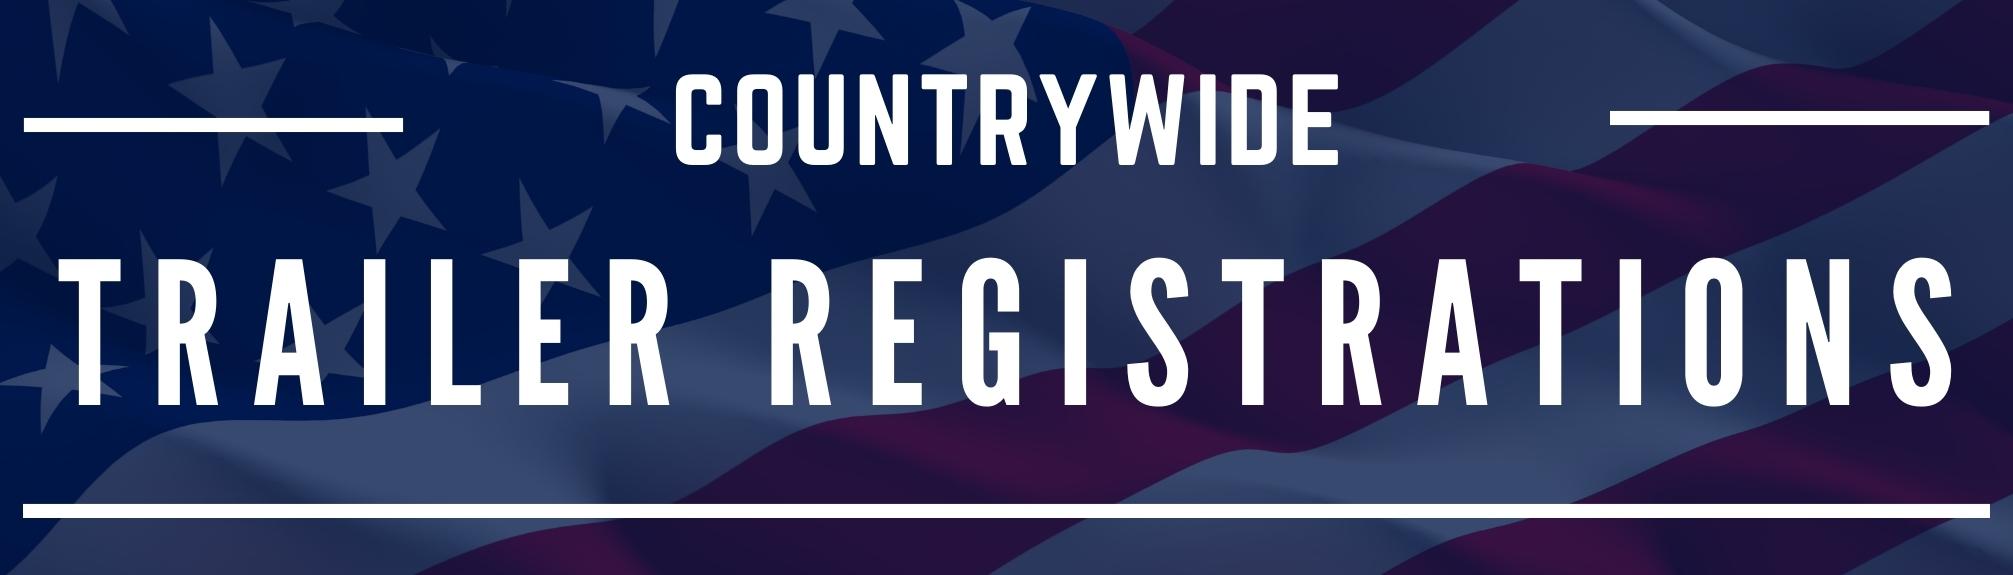 Countrywide Trailer Registrations